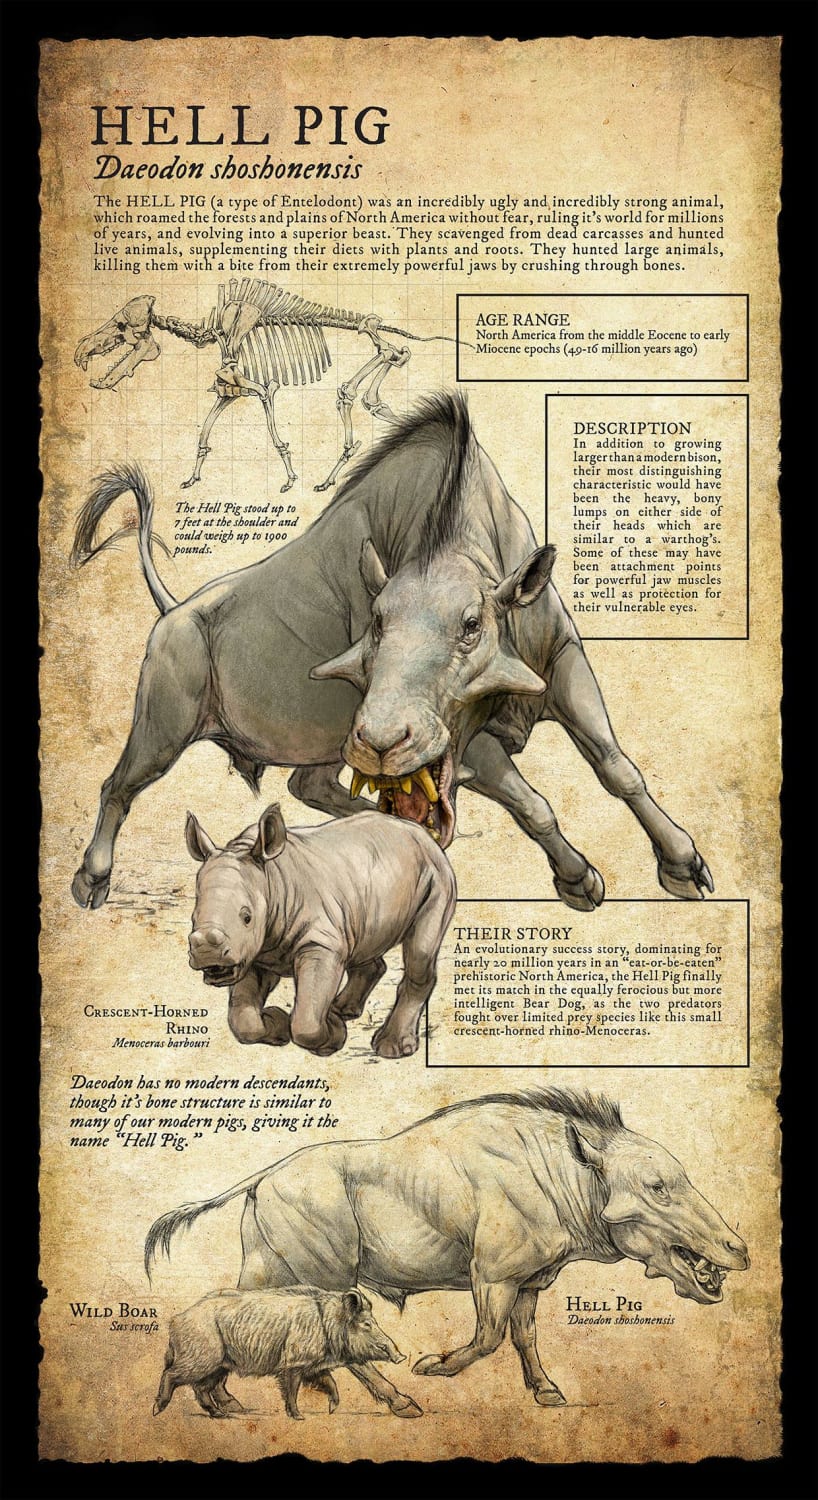 Hell Pig - Infographics created by Beth Zaiken as signages for the Natural History Museum.